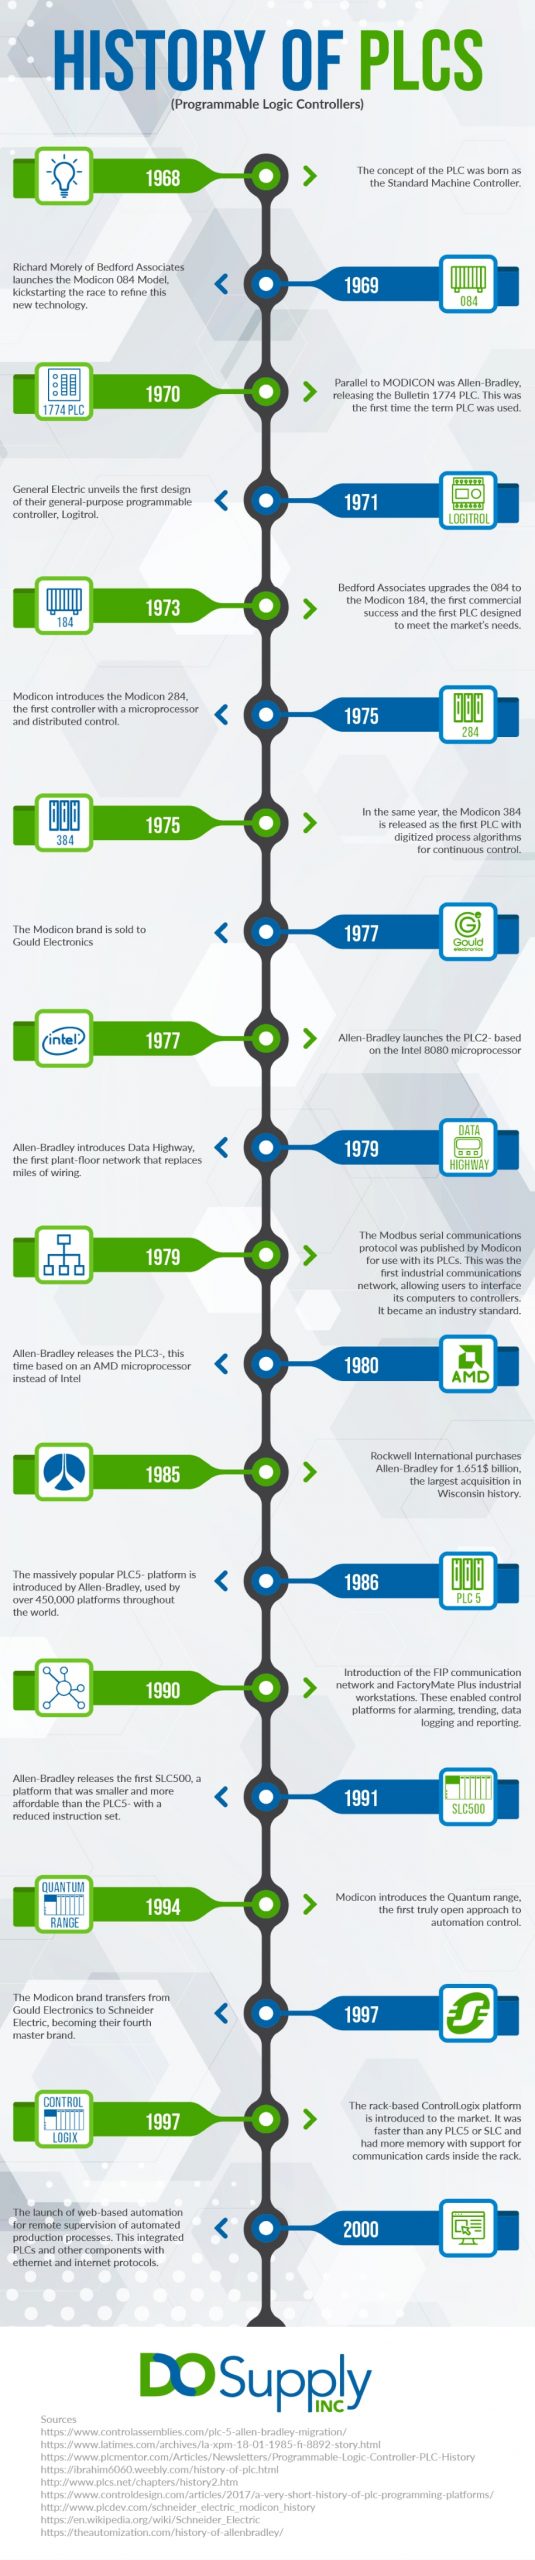 history of plcs infographic